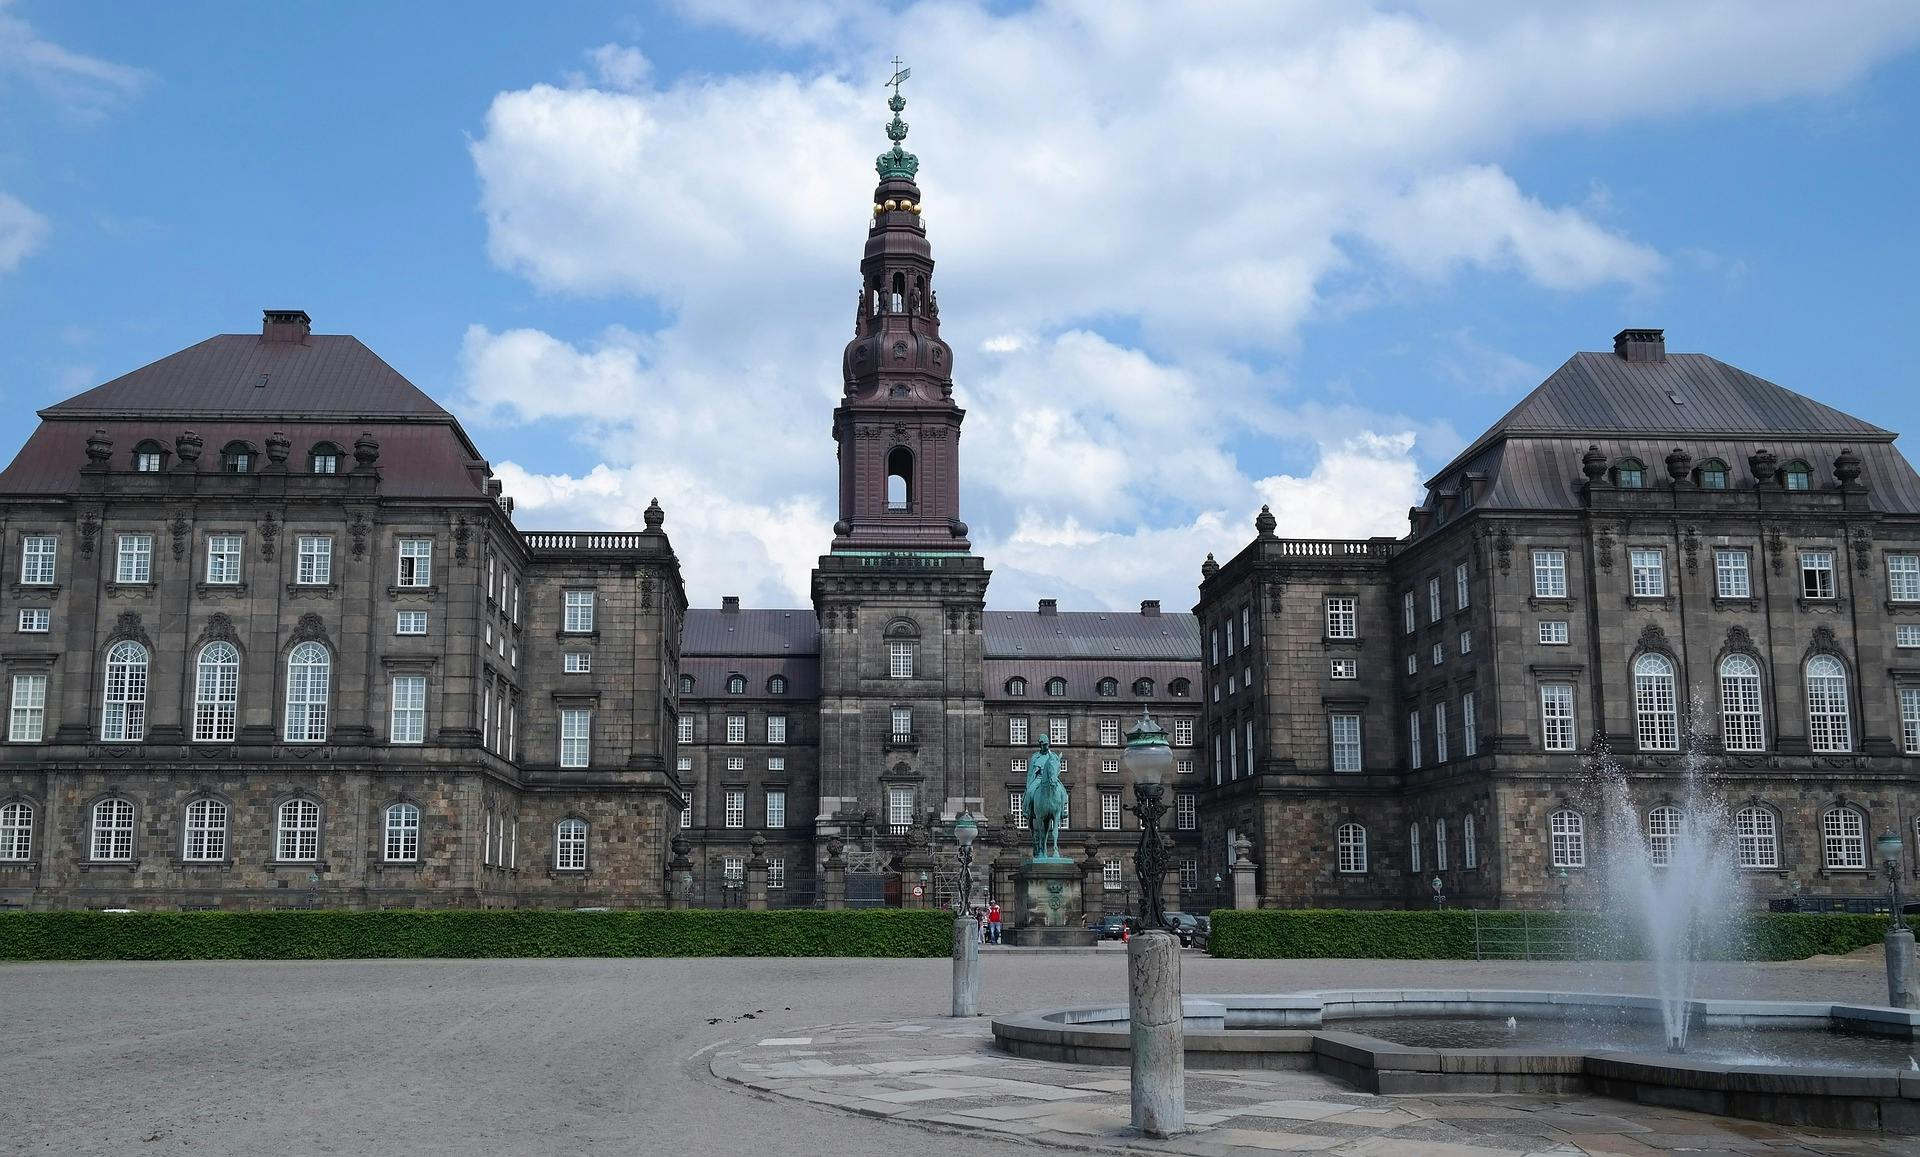 Murder mystery self-guided experience at Christiansborg Palace